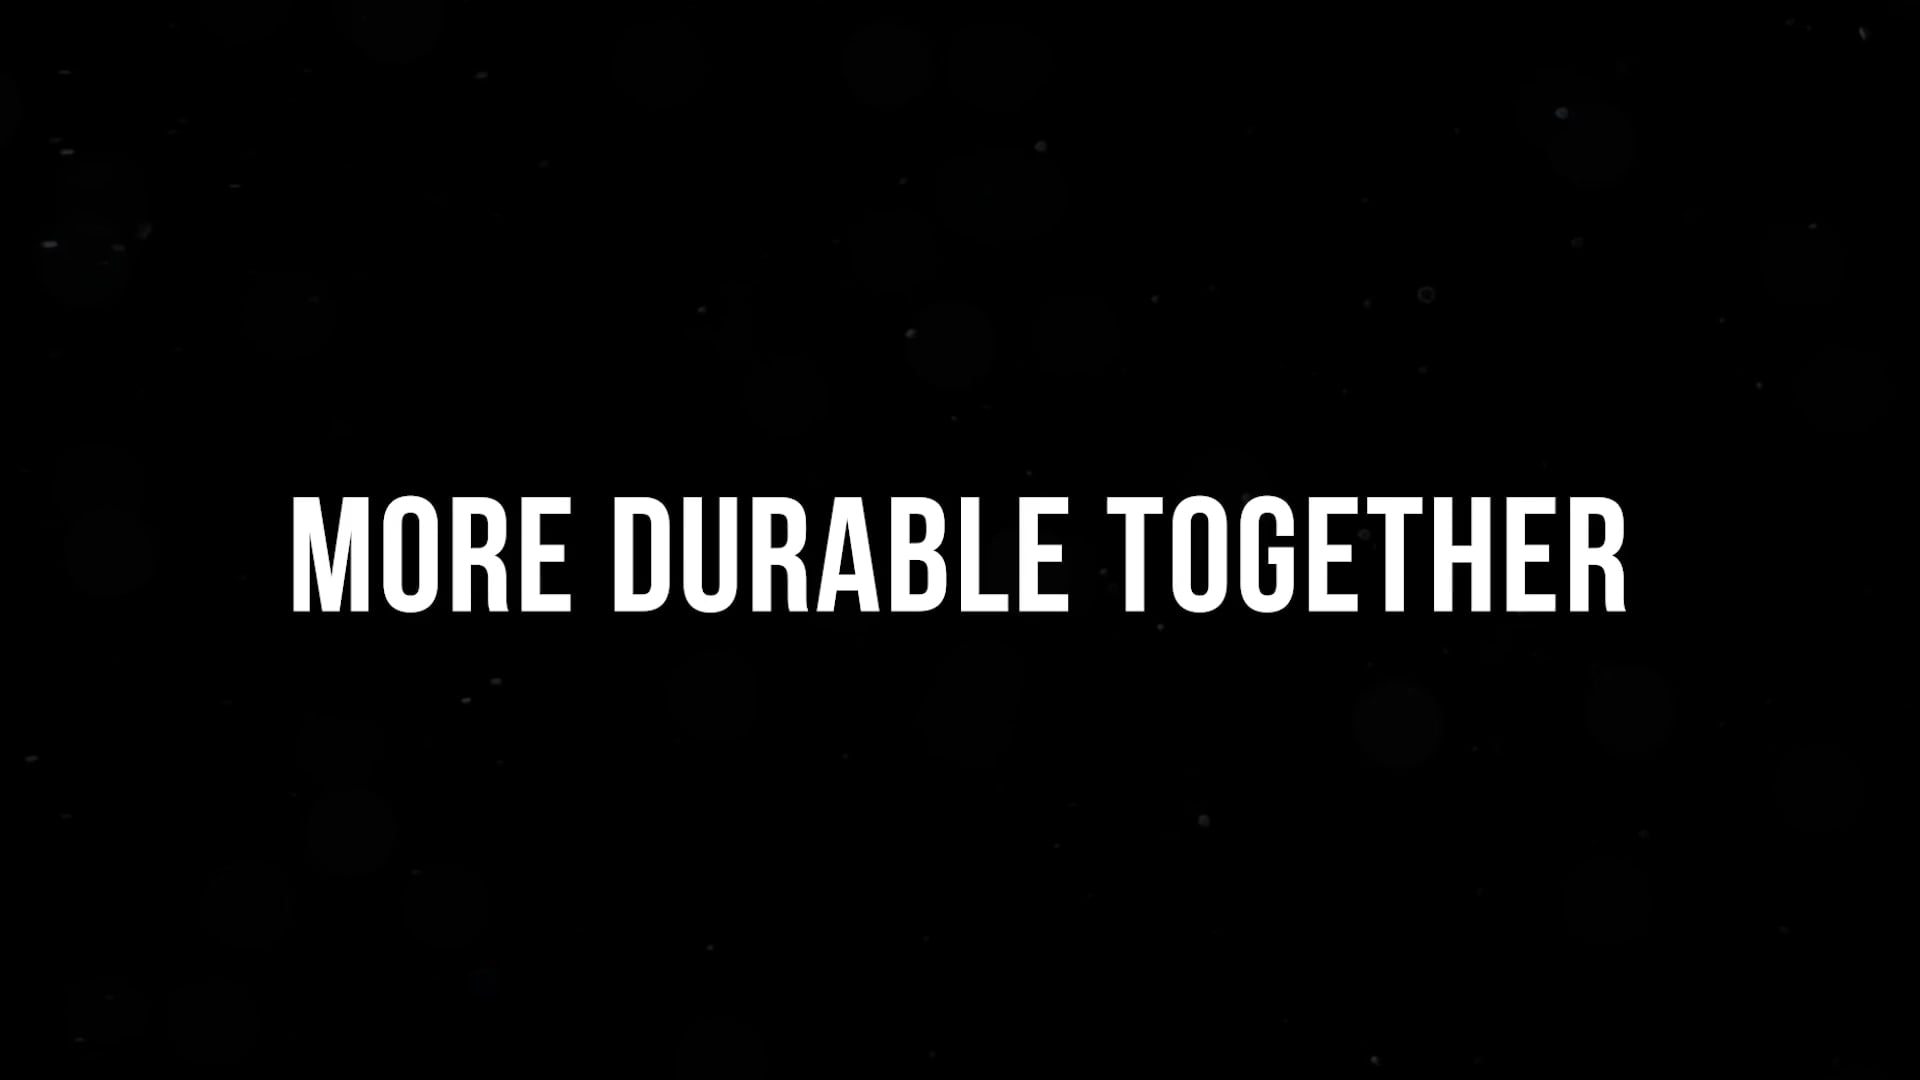 Sullair - More Durable Together